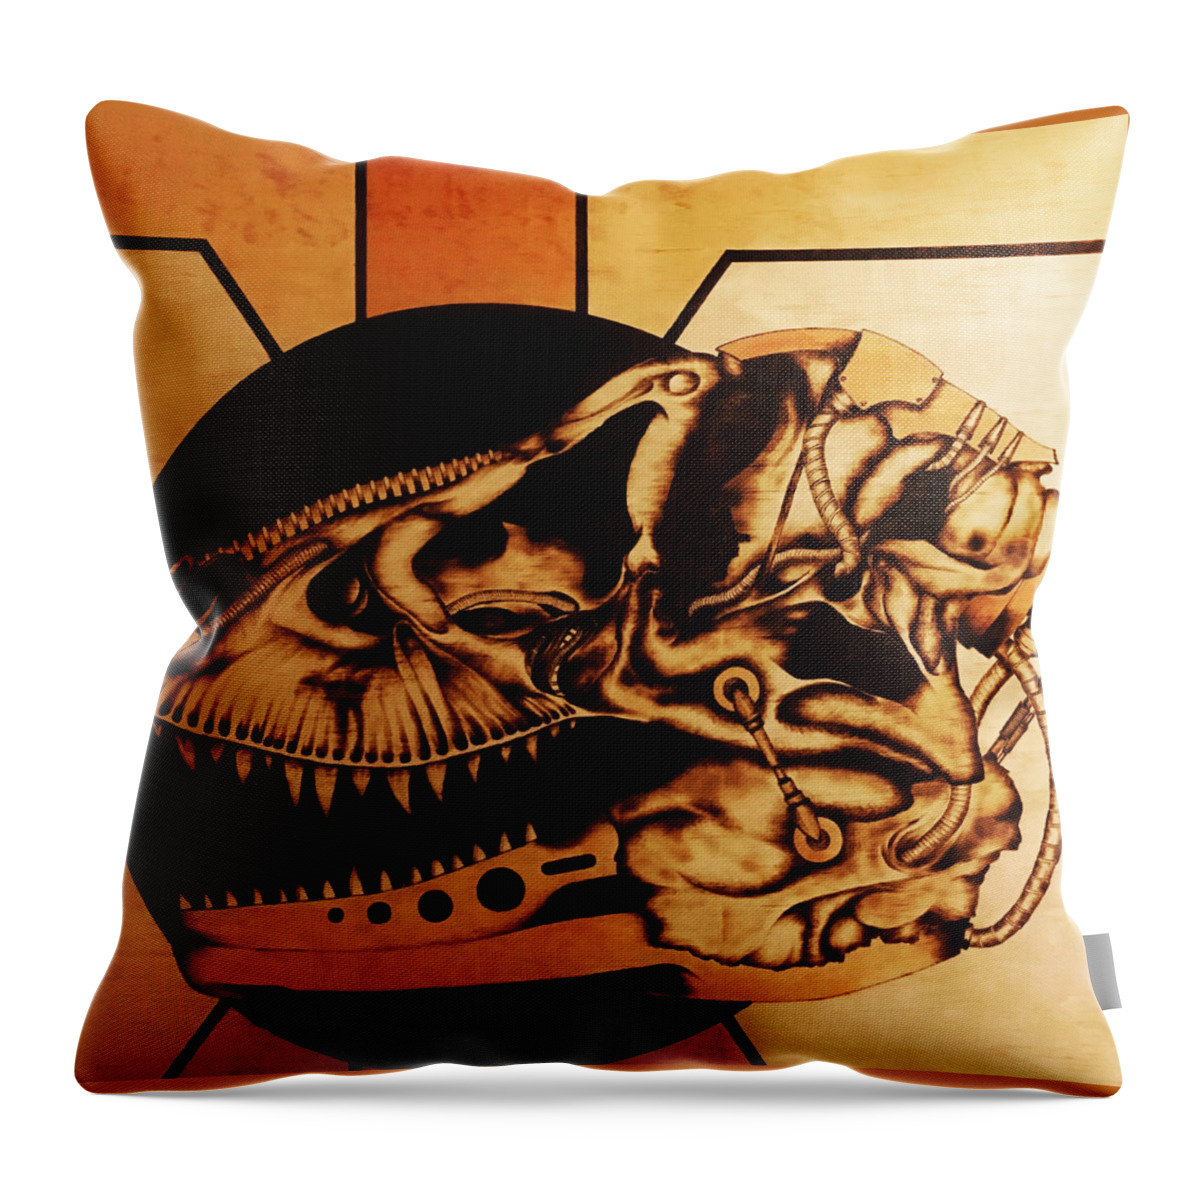 Pyrography Throw Pillow featuring the pyrography Untitled #5 by Jeff DOttavio